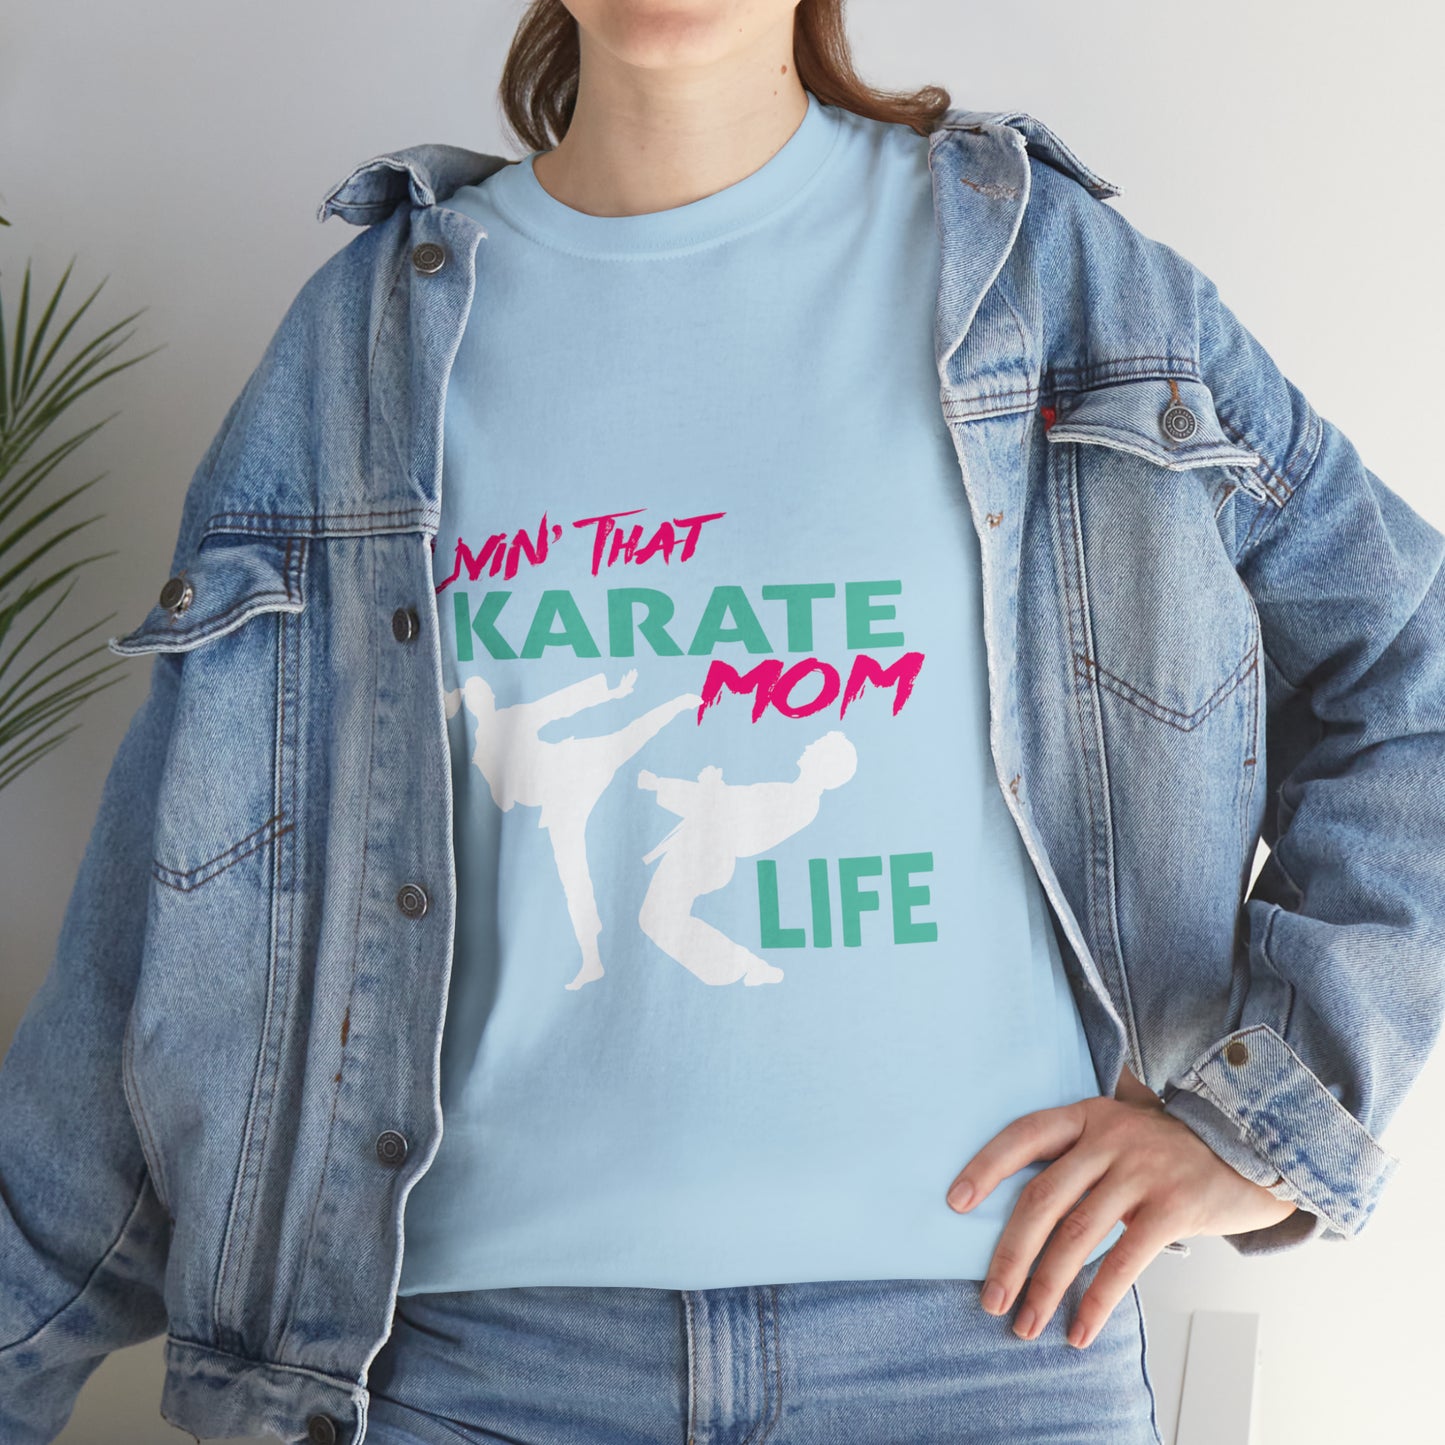 Copy of Livin' That Karate Mom Life Heavy Cotton Tee